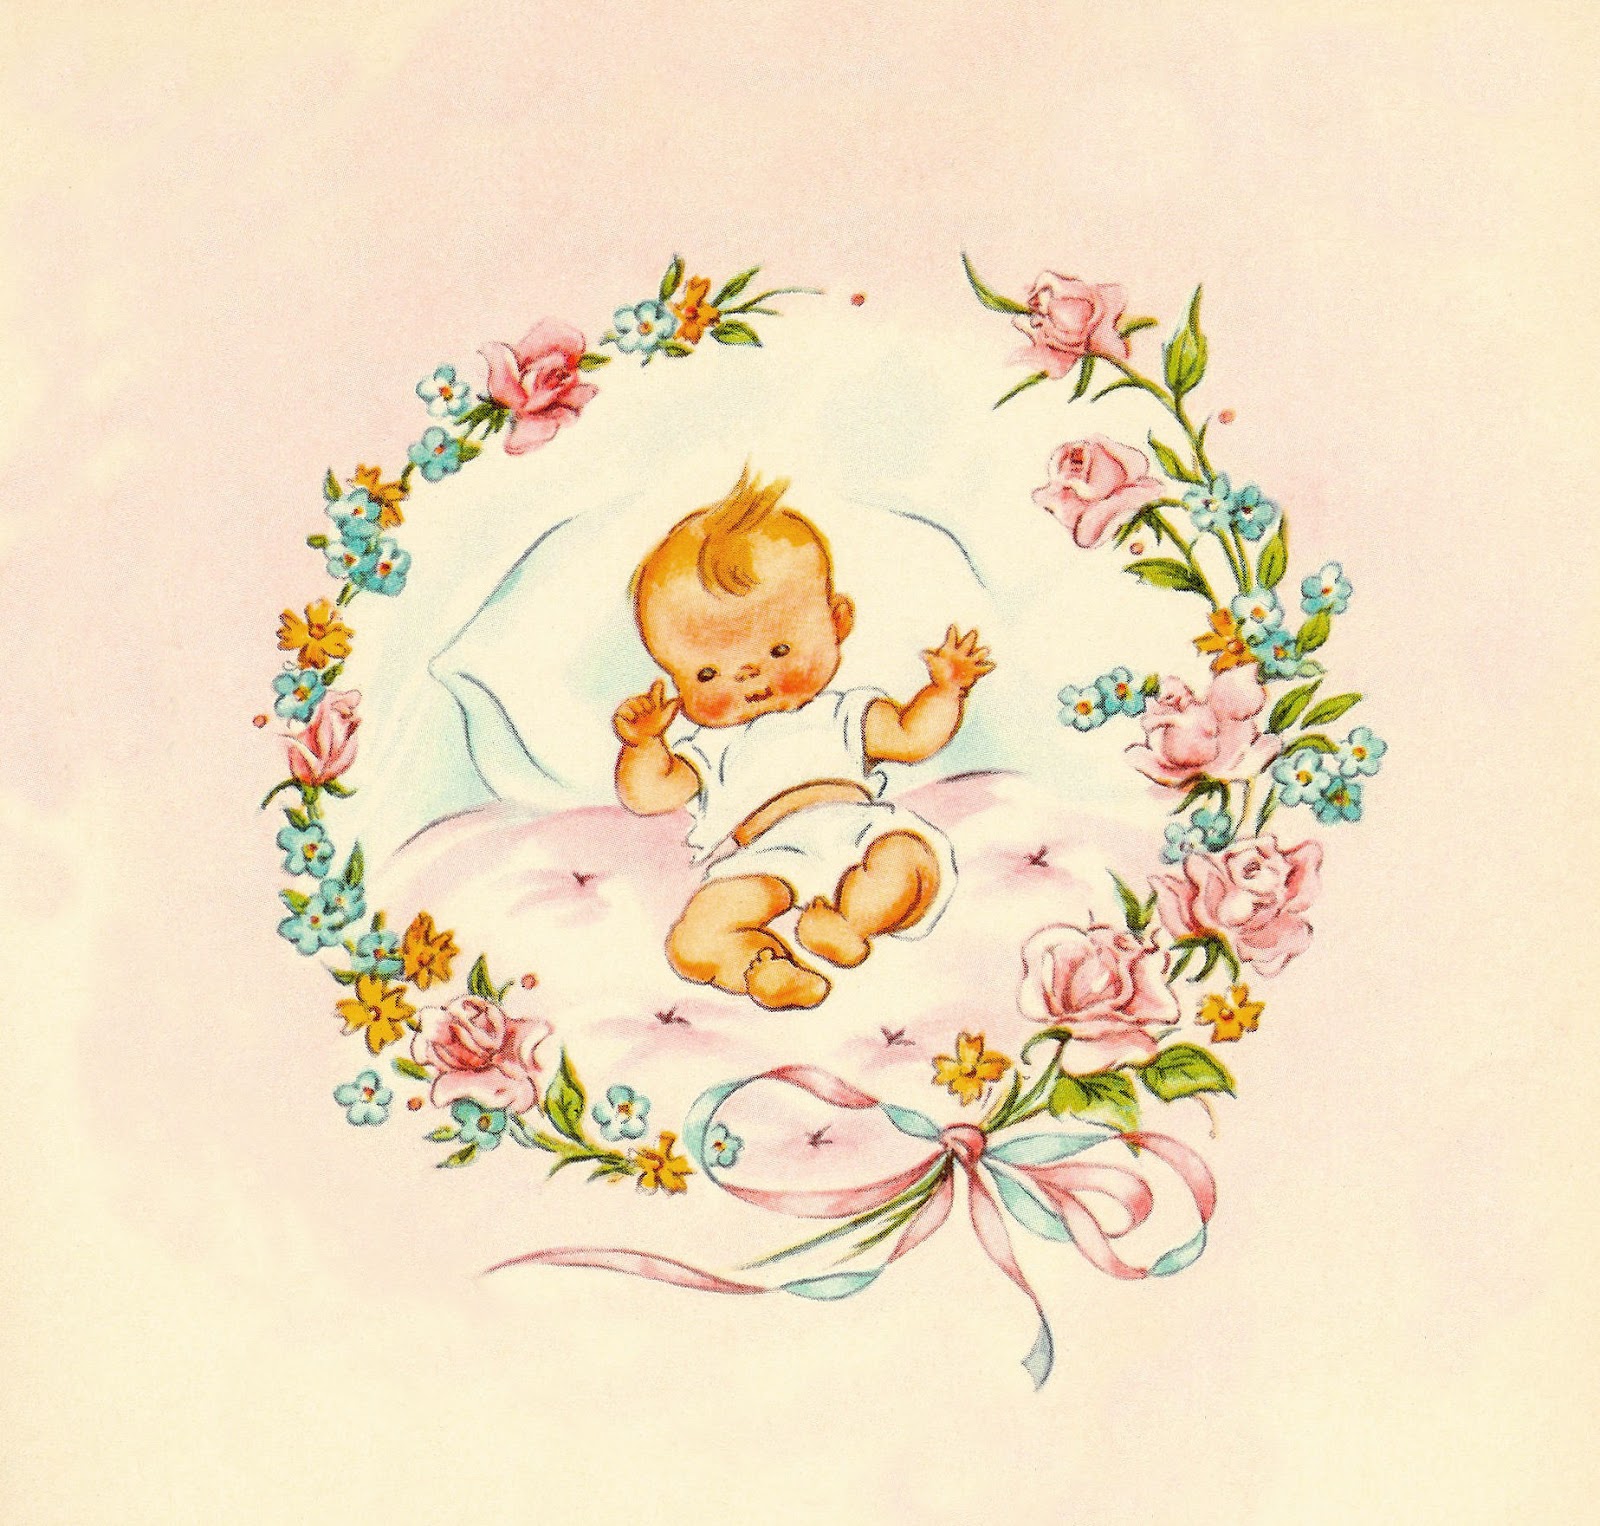 Vintage Baby Clip Art  Pink And Blue Baby Girl Or Boy Image With